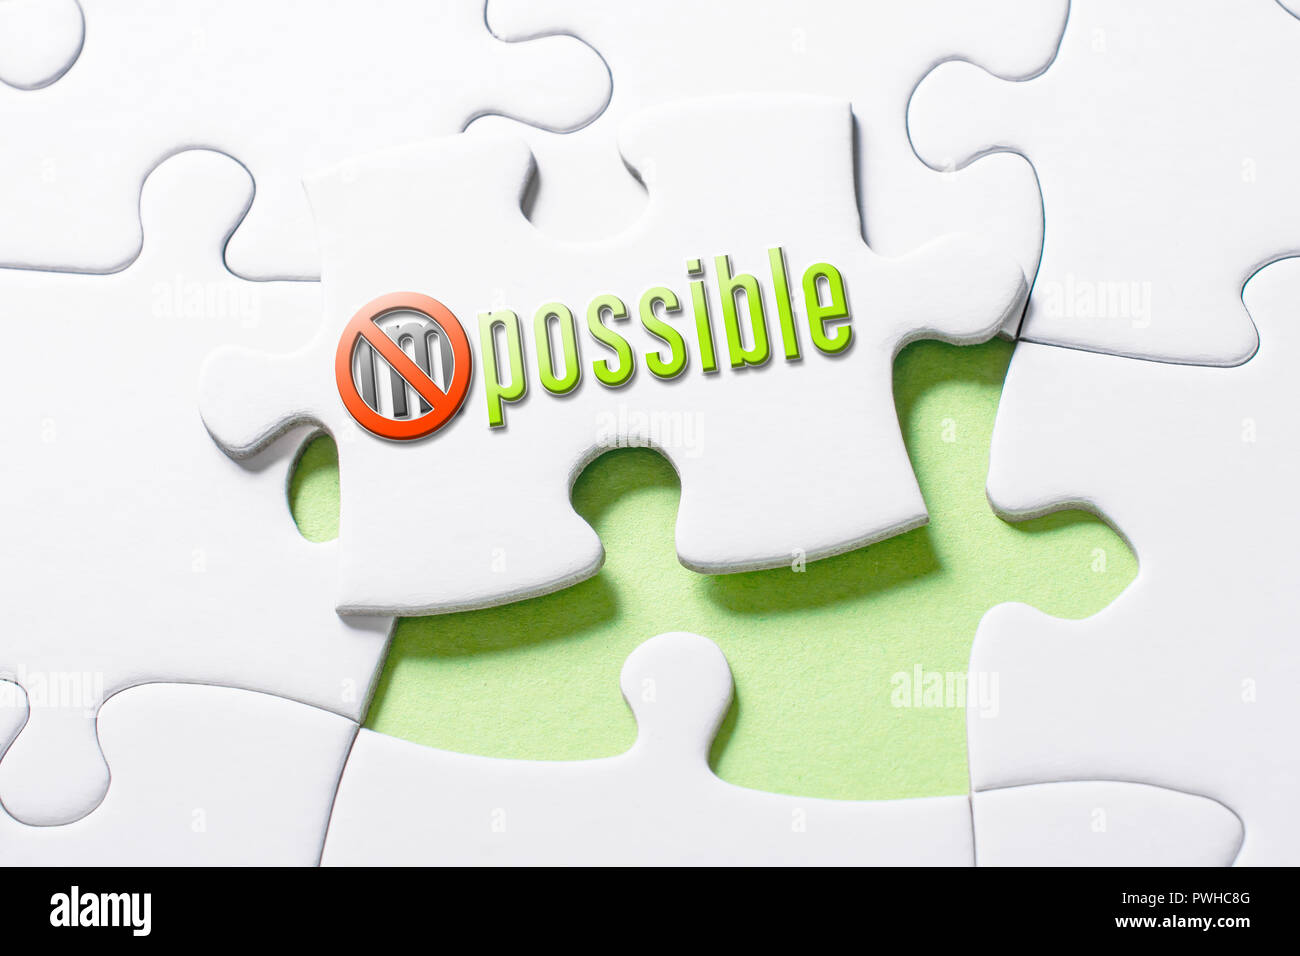 The Word Impossible With Crossed Out IM In Missing Piece Jigsaw Puzzle Stock Photo